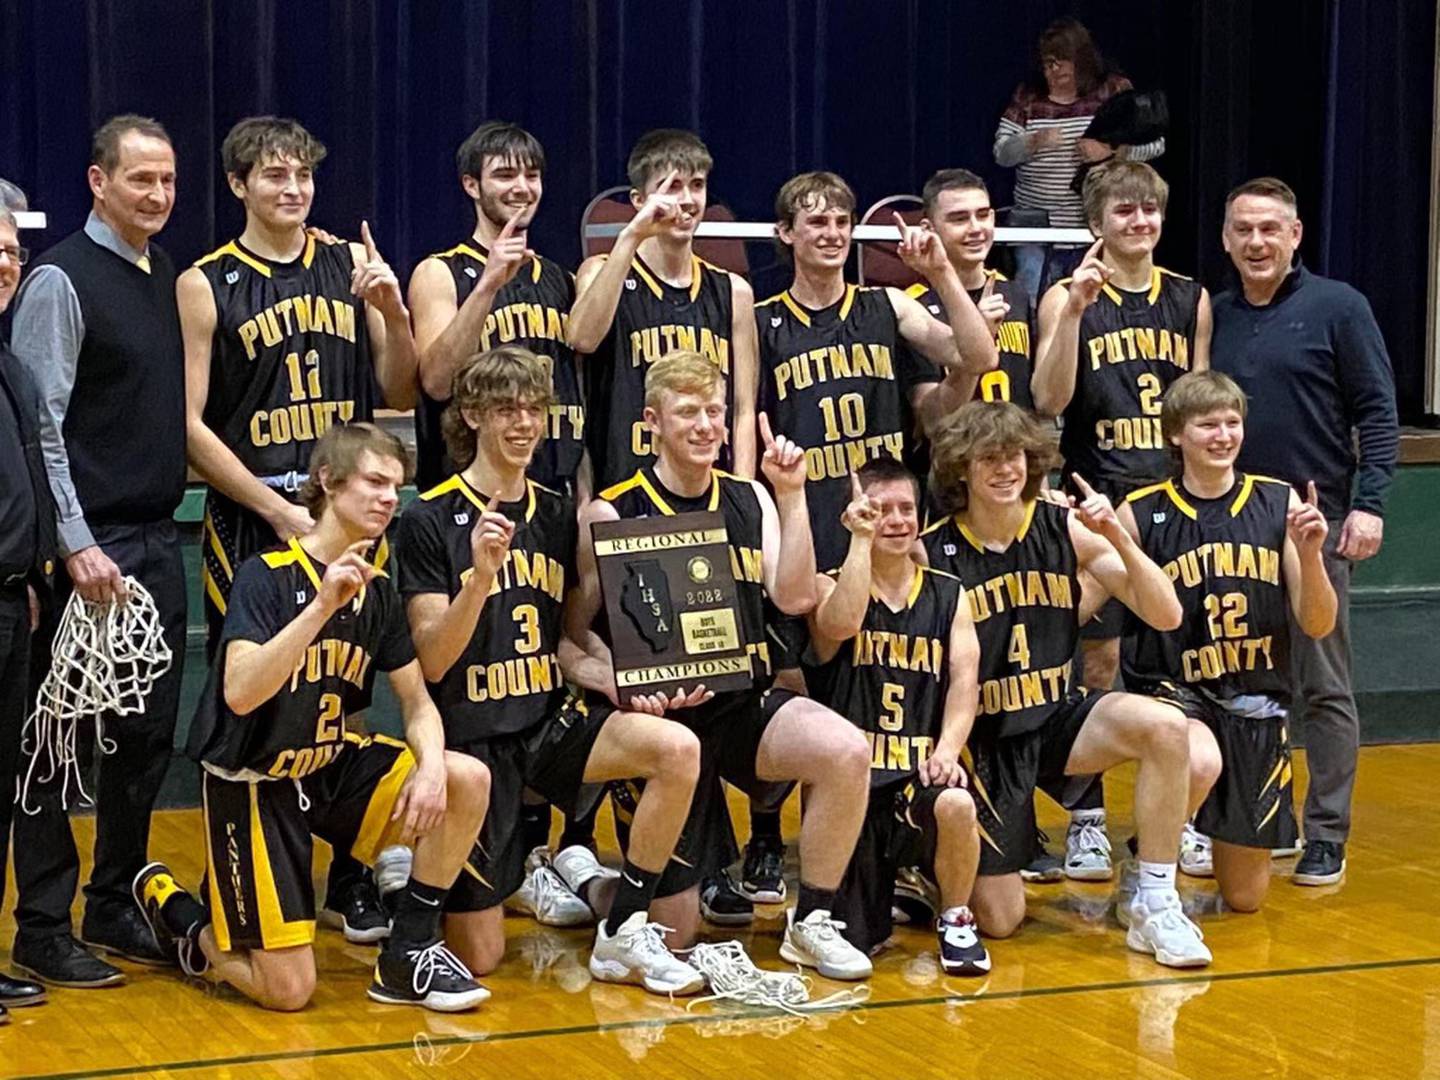 Putnam County Harold Fay was named as a IBCA Class 1A Coach of the Year for District 12. He led the Panthers to the regional champion and Sweet 16 finish with a 21-15 record.